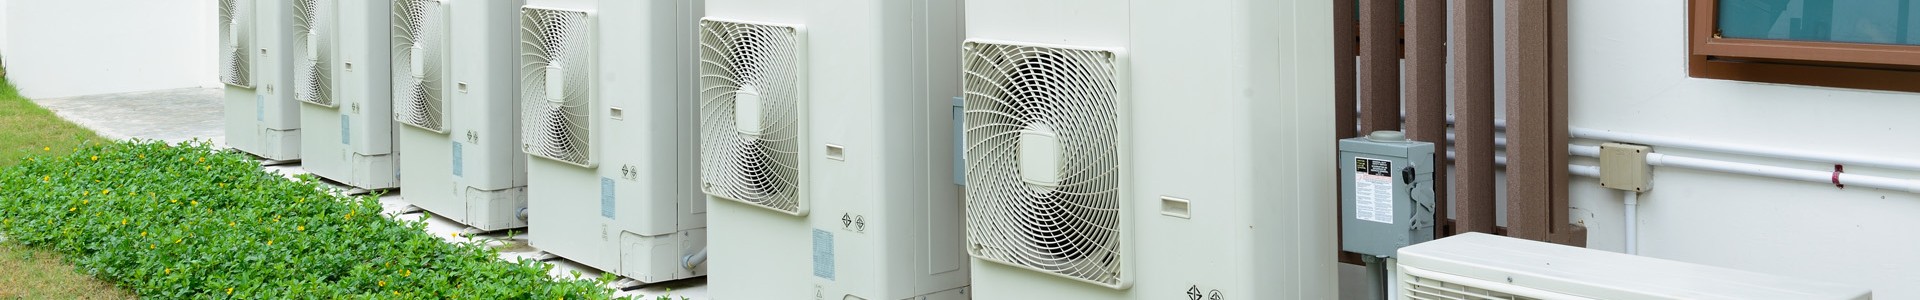 San Diego Air Conditioning Services